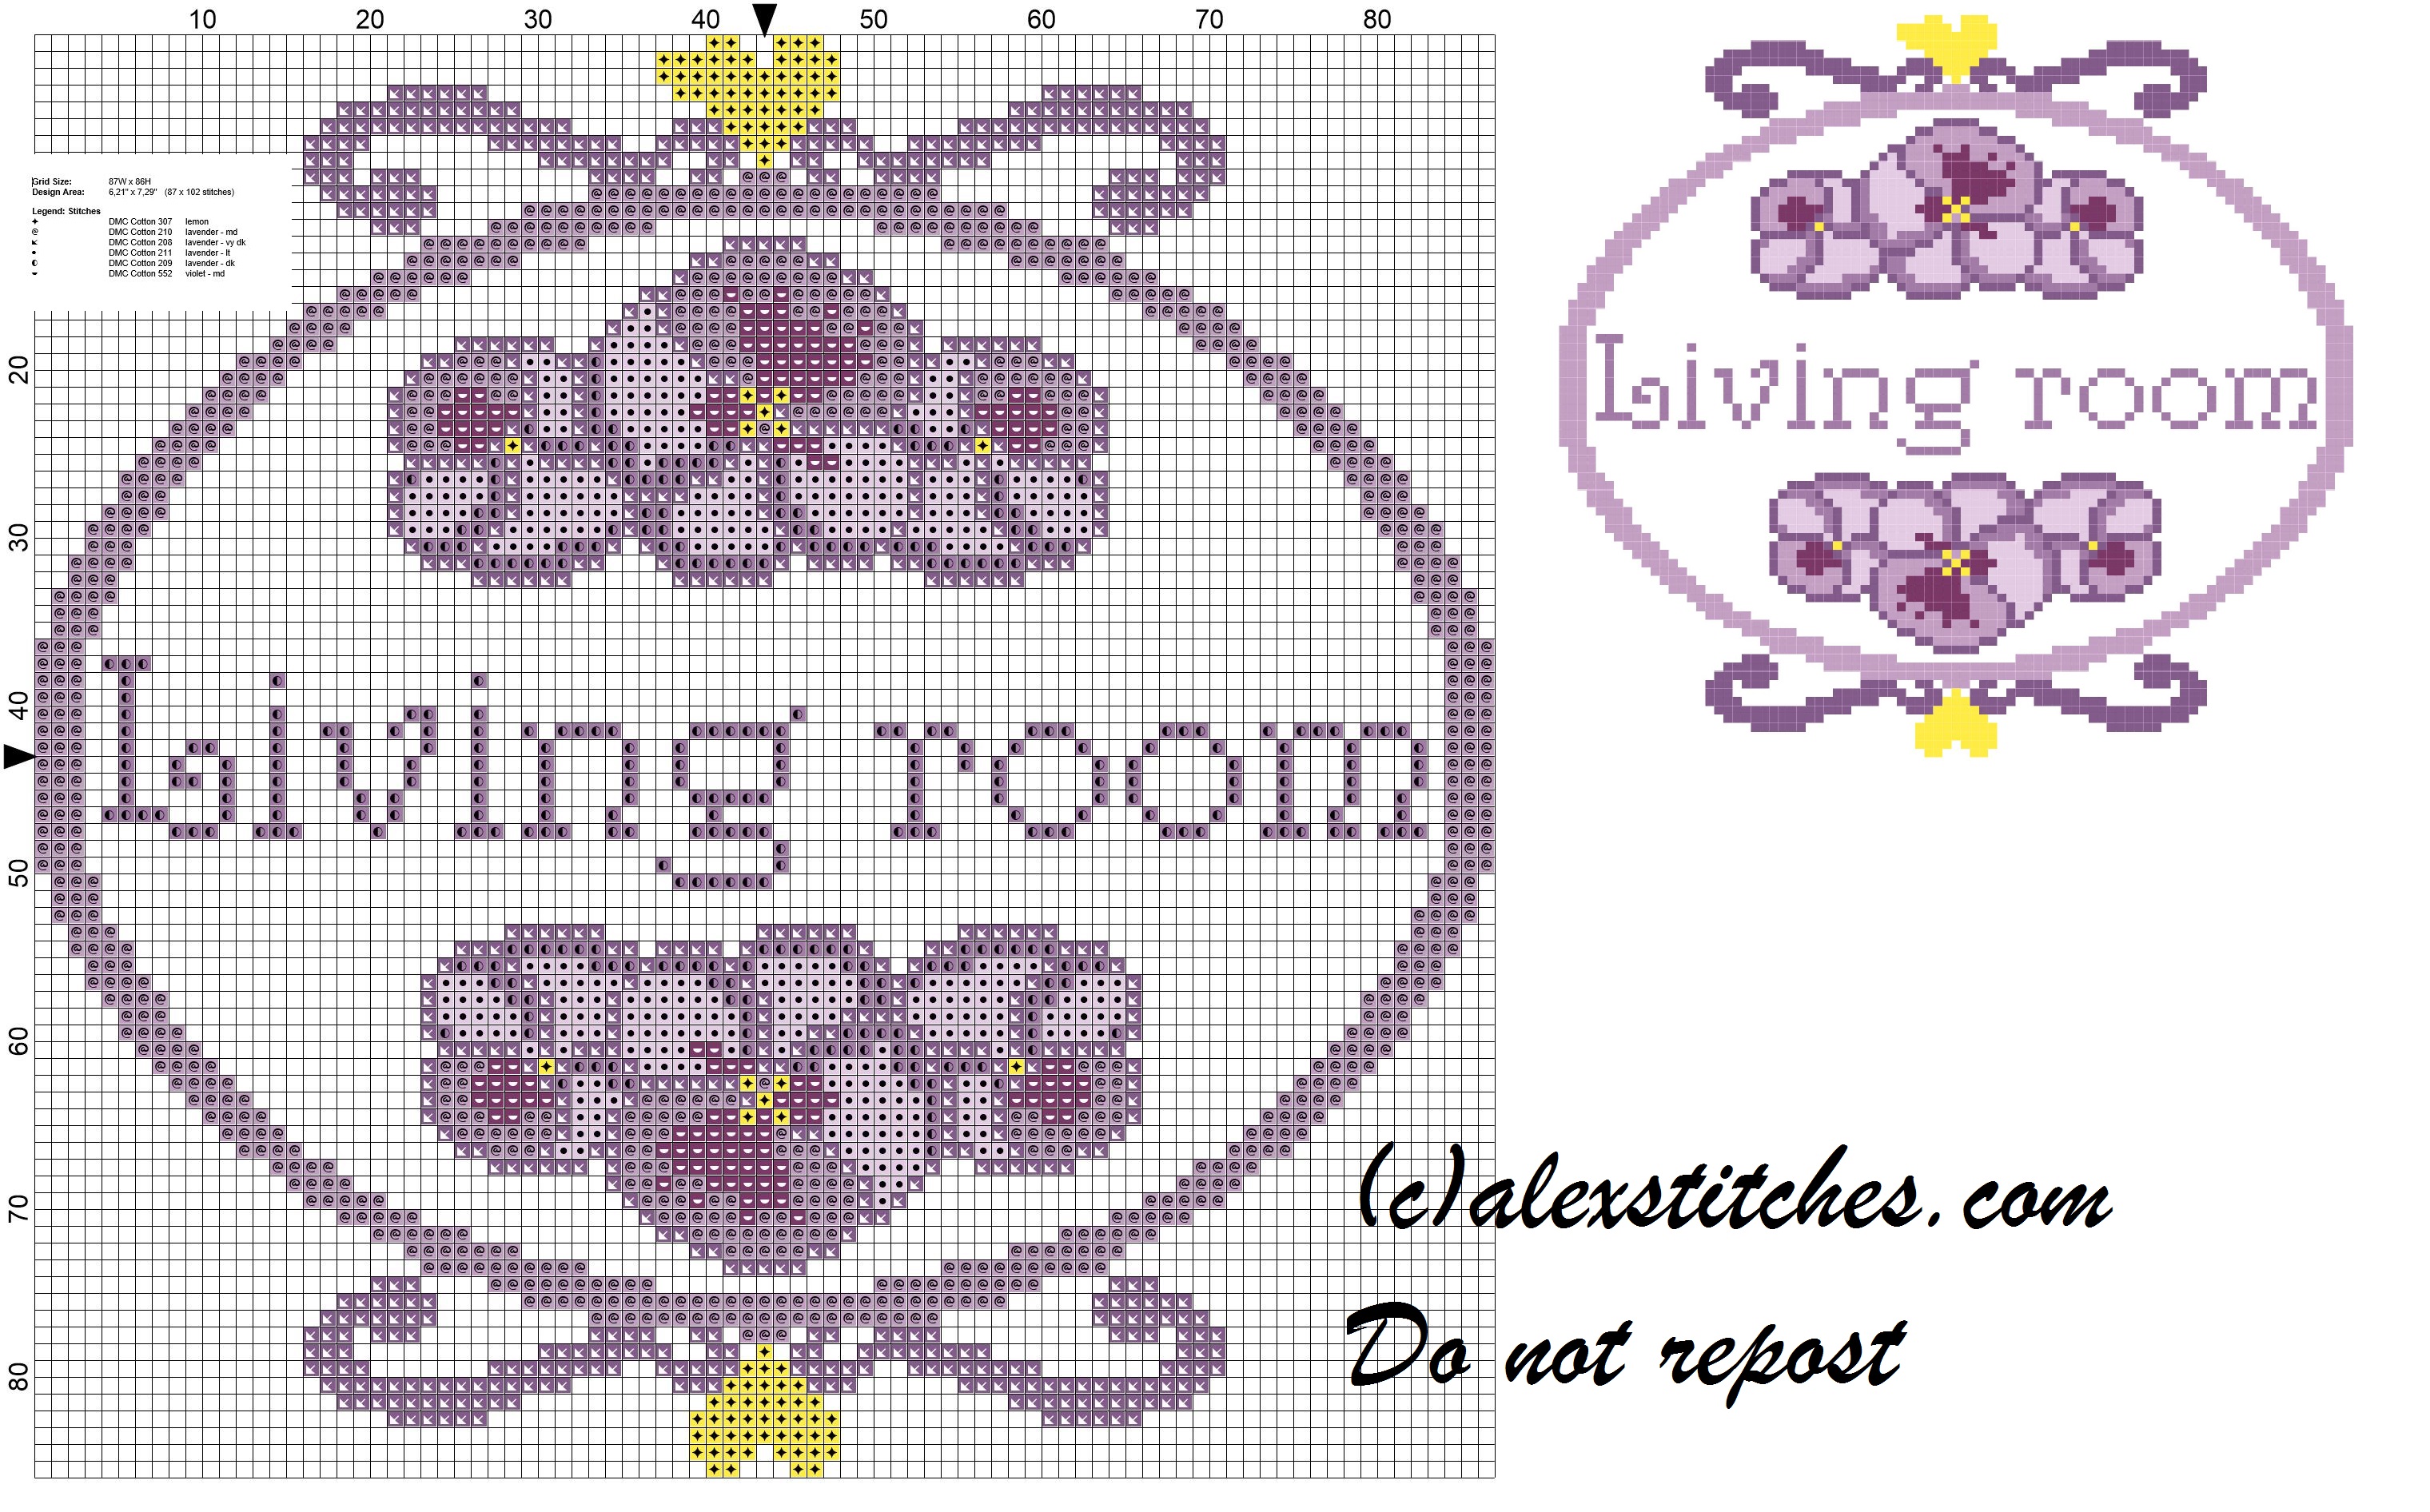 Living room double pansy cross stitch patern